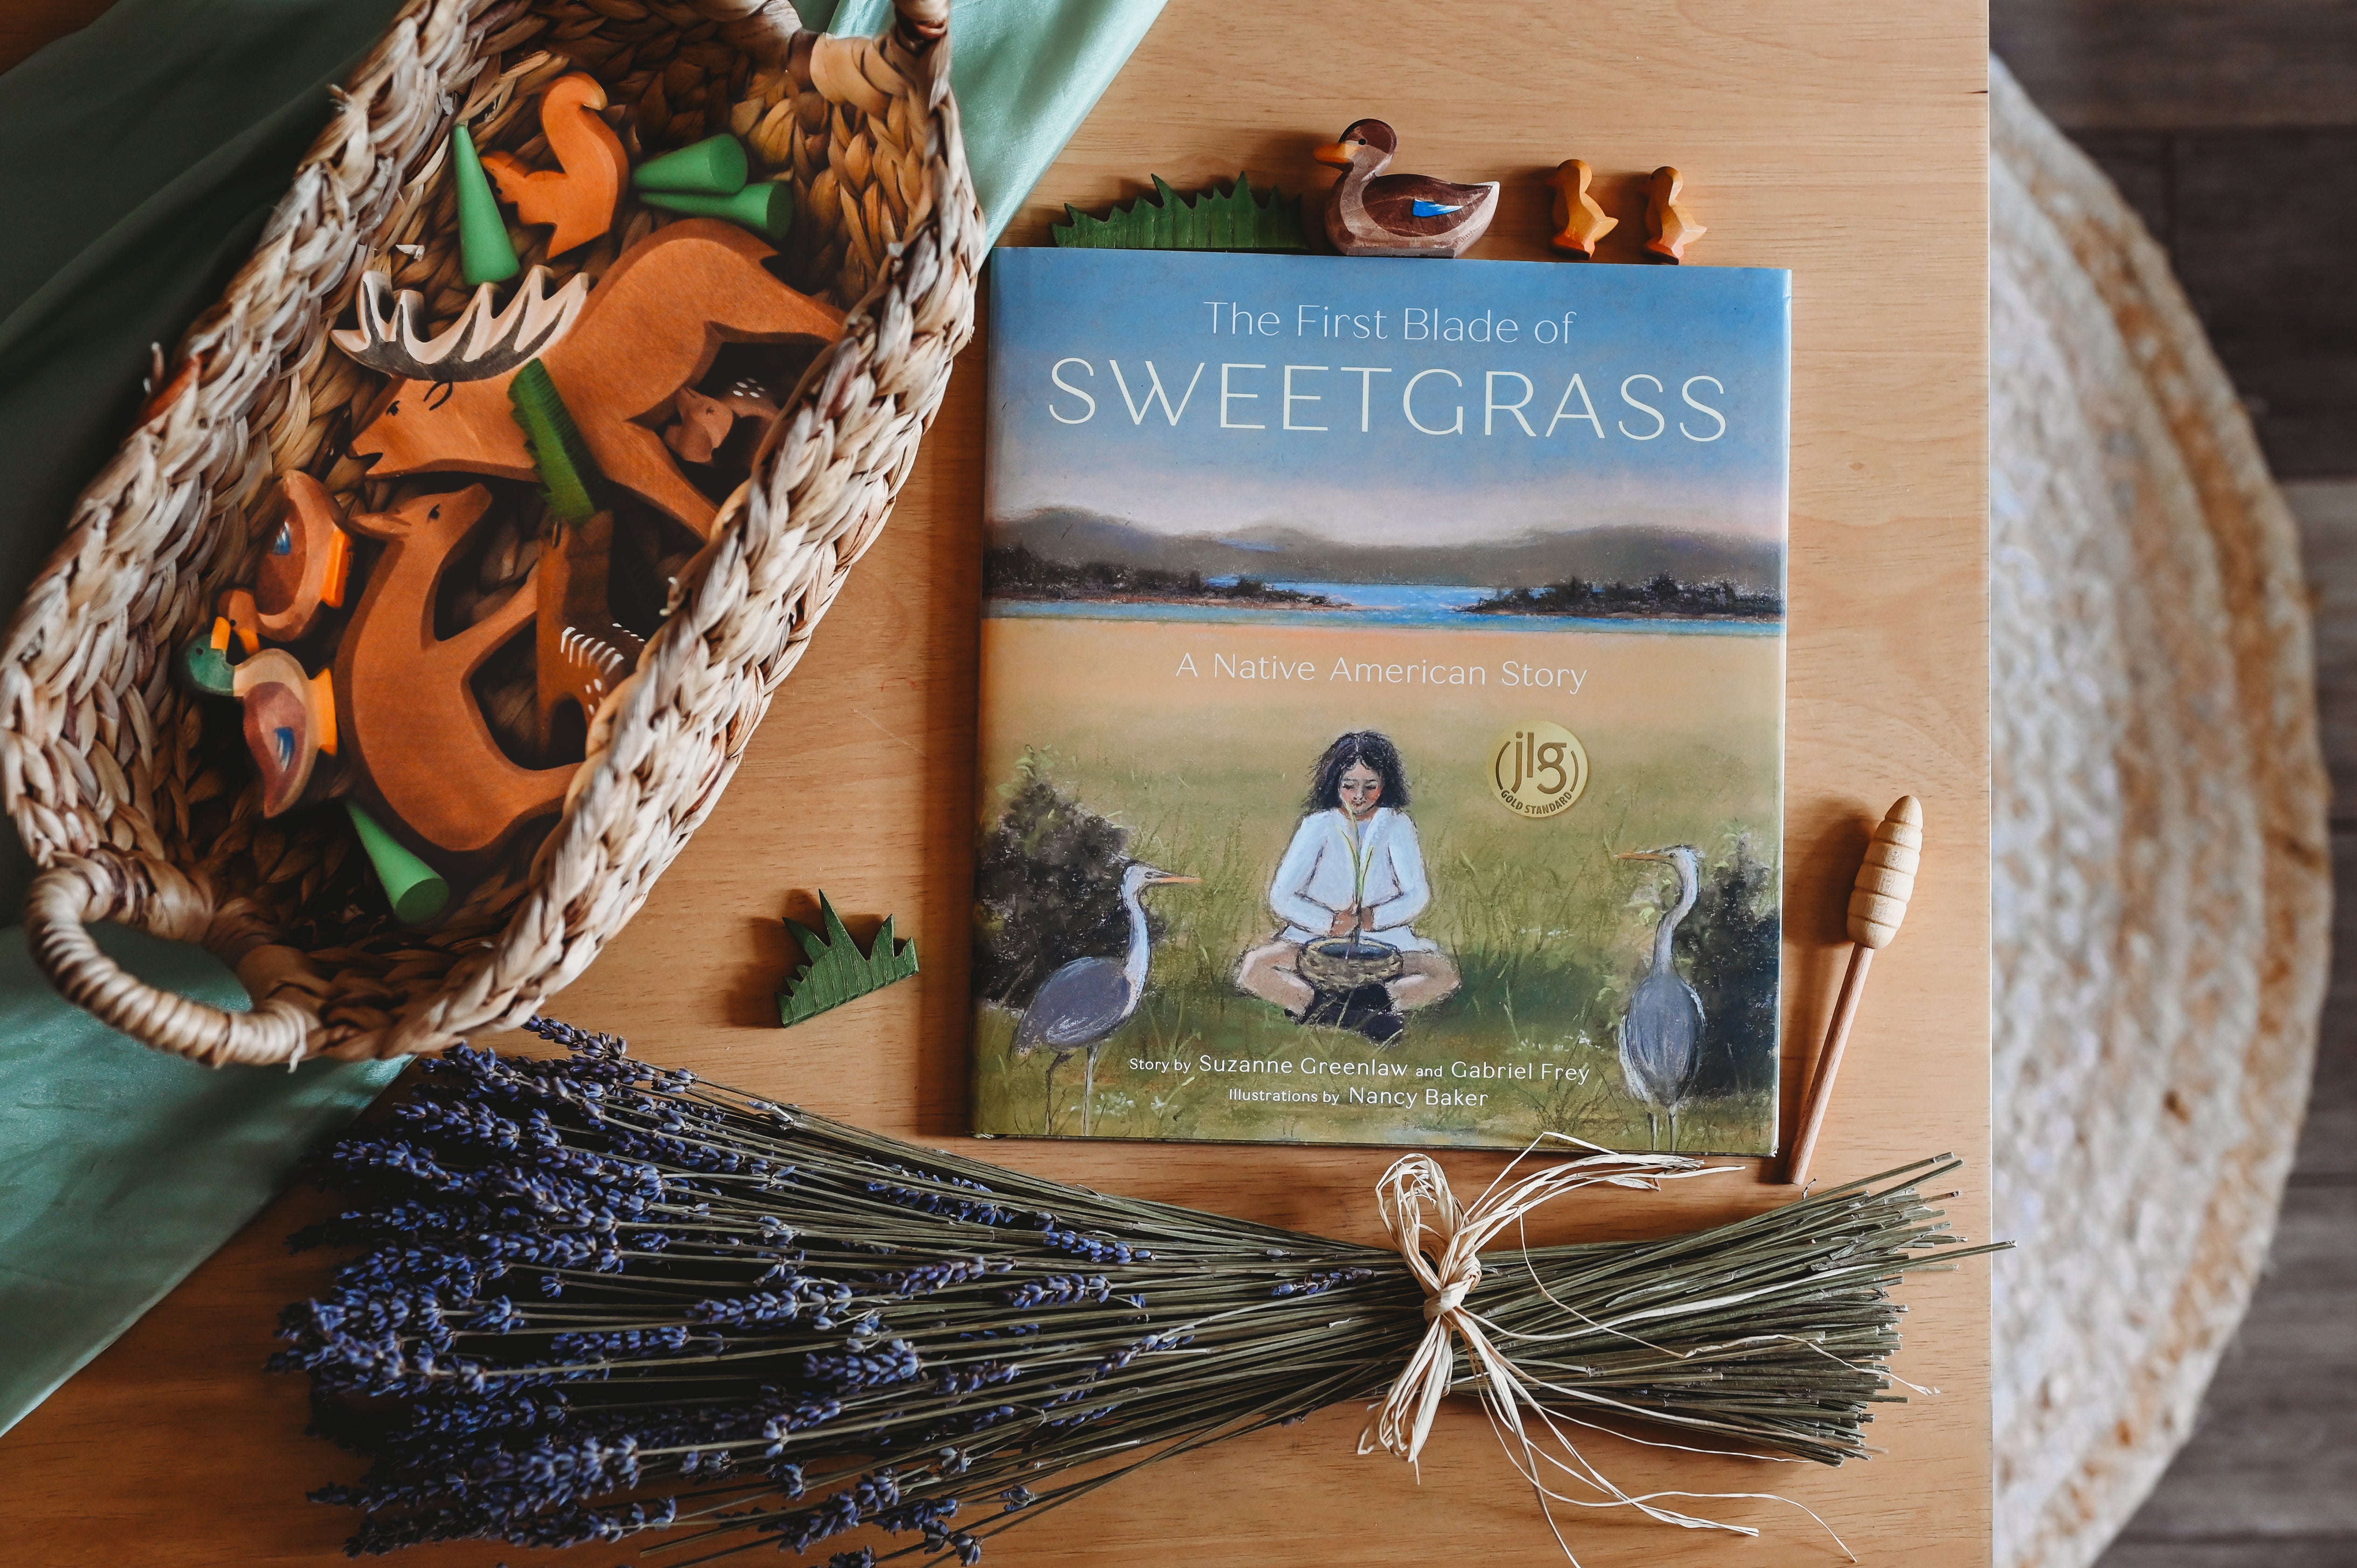 Summer Book Club Week Four - The First Blade of Sweetgrass